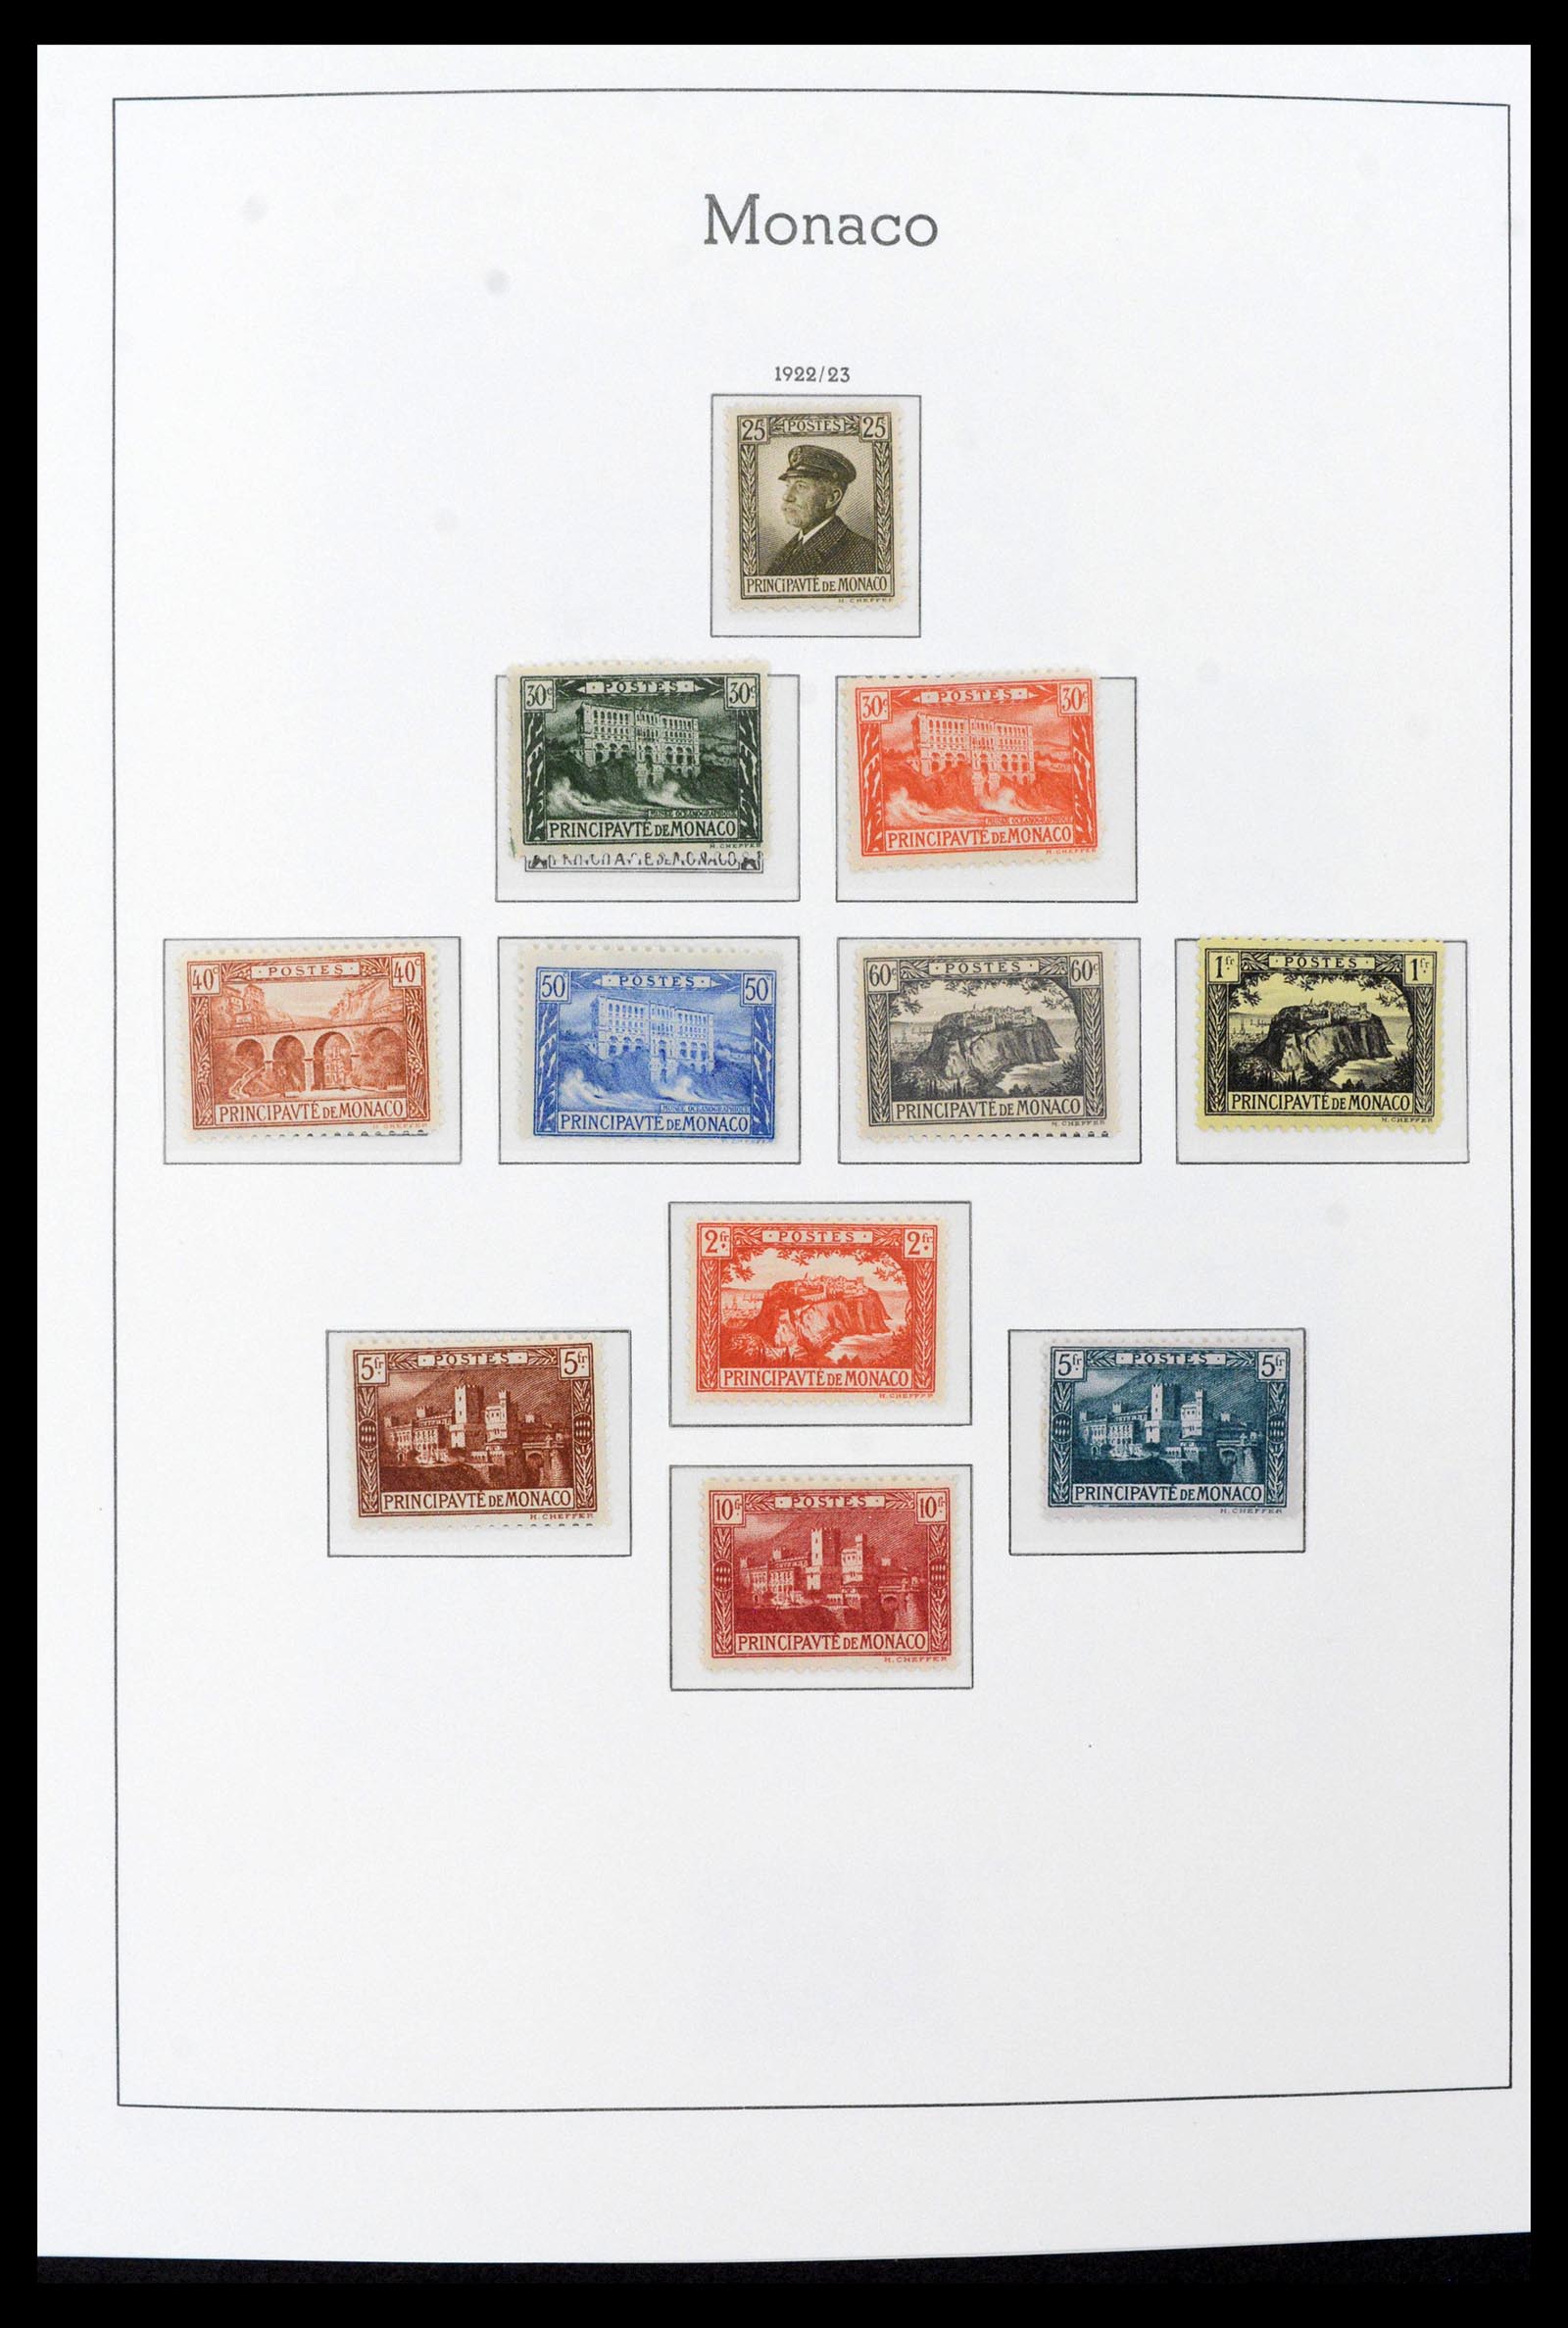 39390 0004 - Stamp collection 39390 Monaco complete 1885-1990.